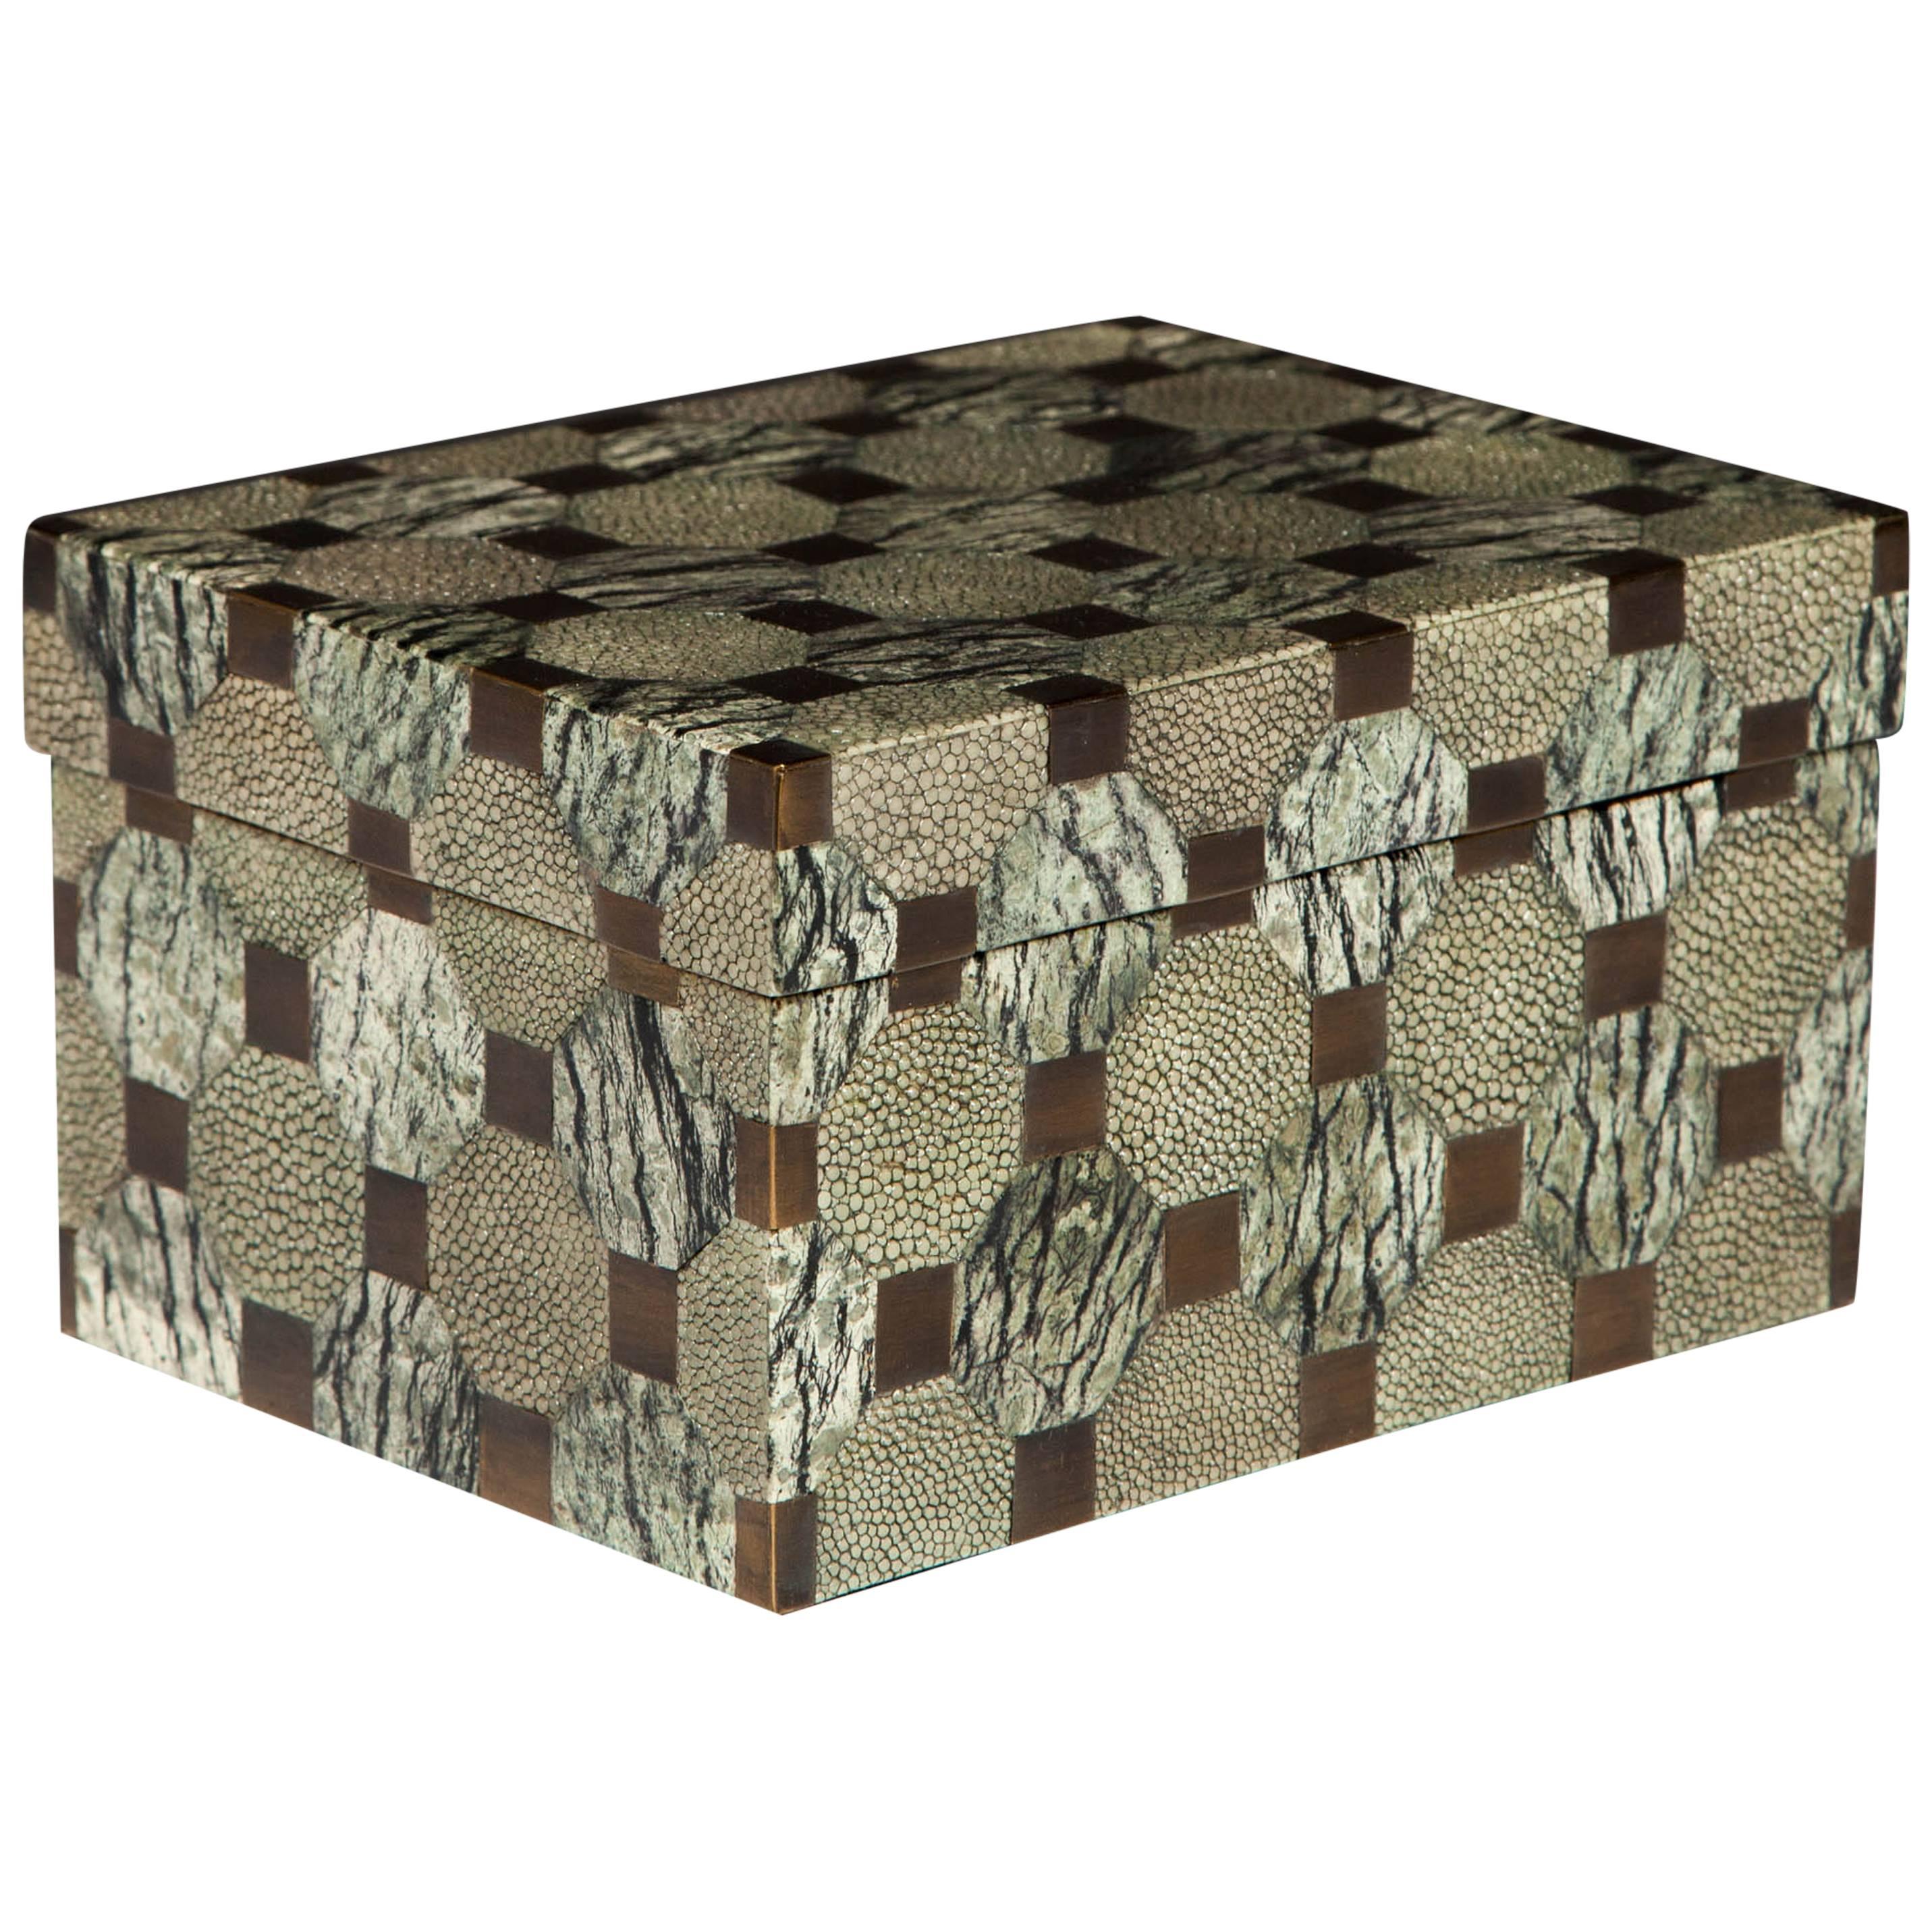 Exceptional Shagreen and Bronze Box with Geometric Design